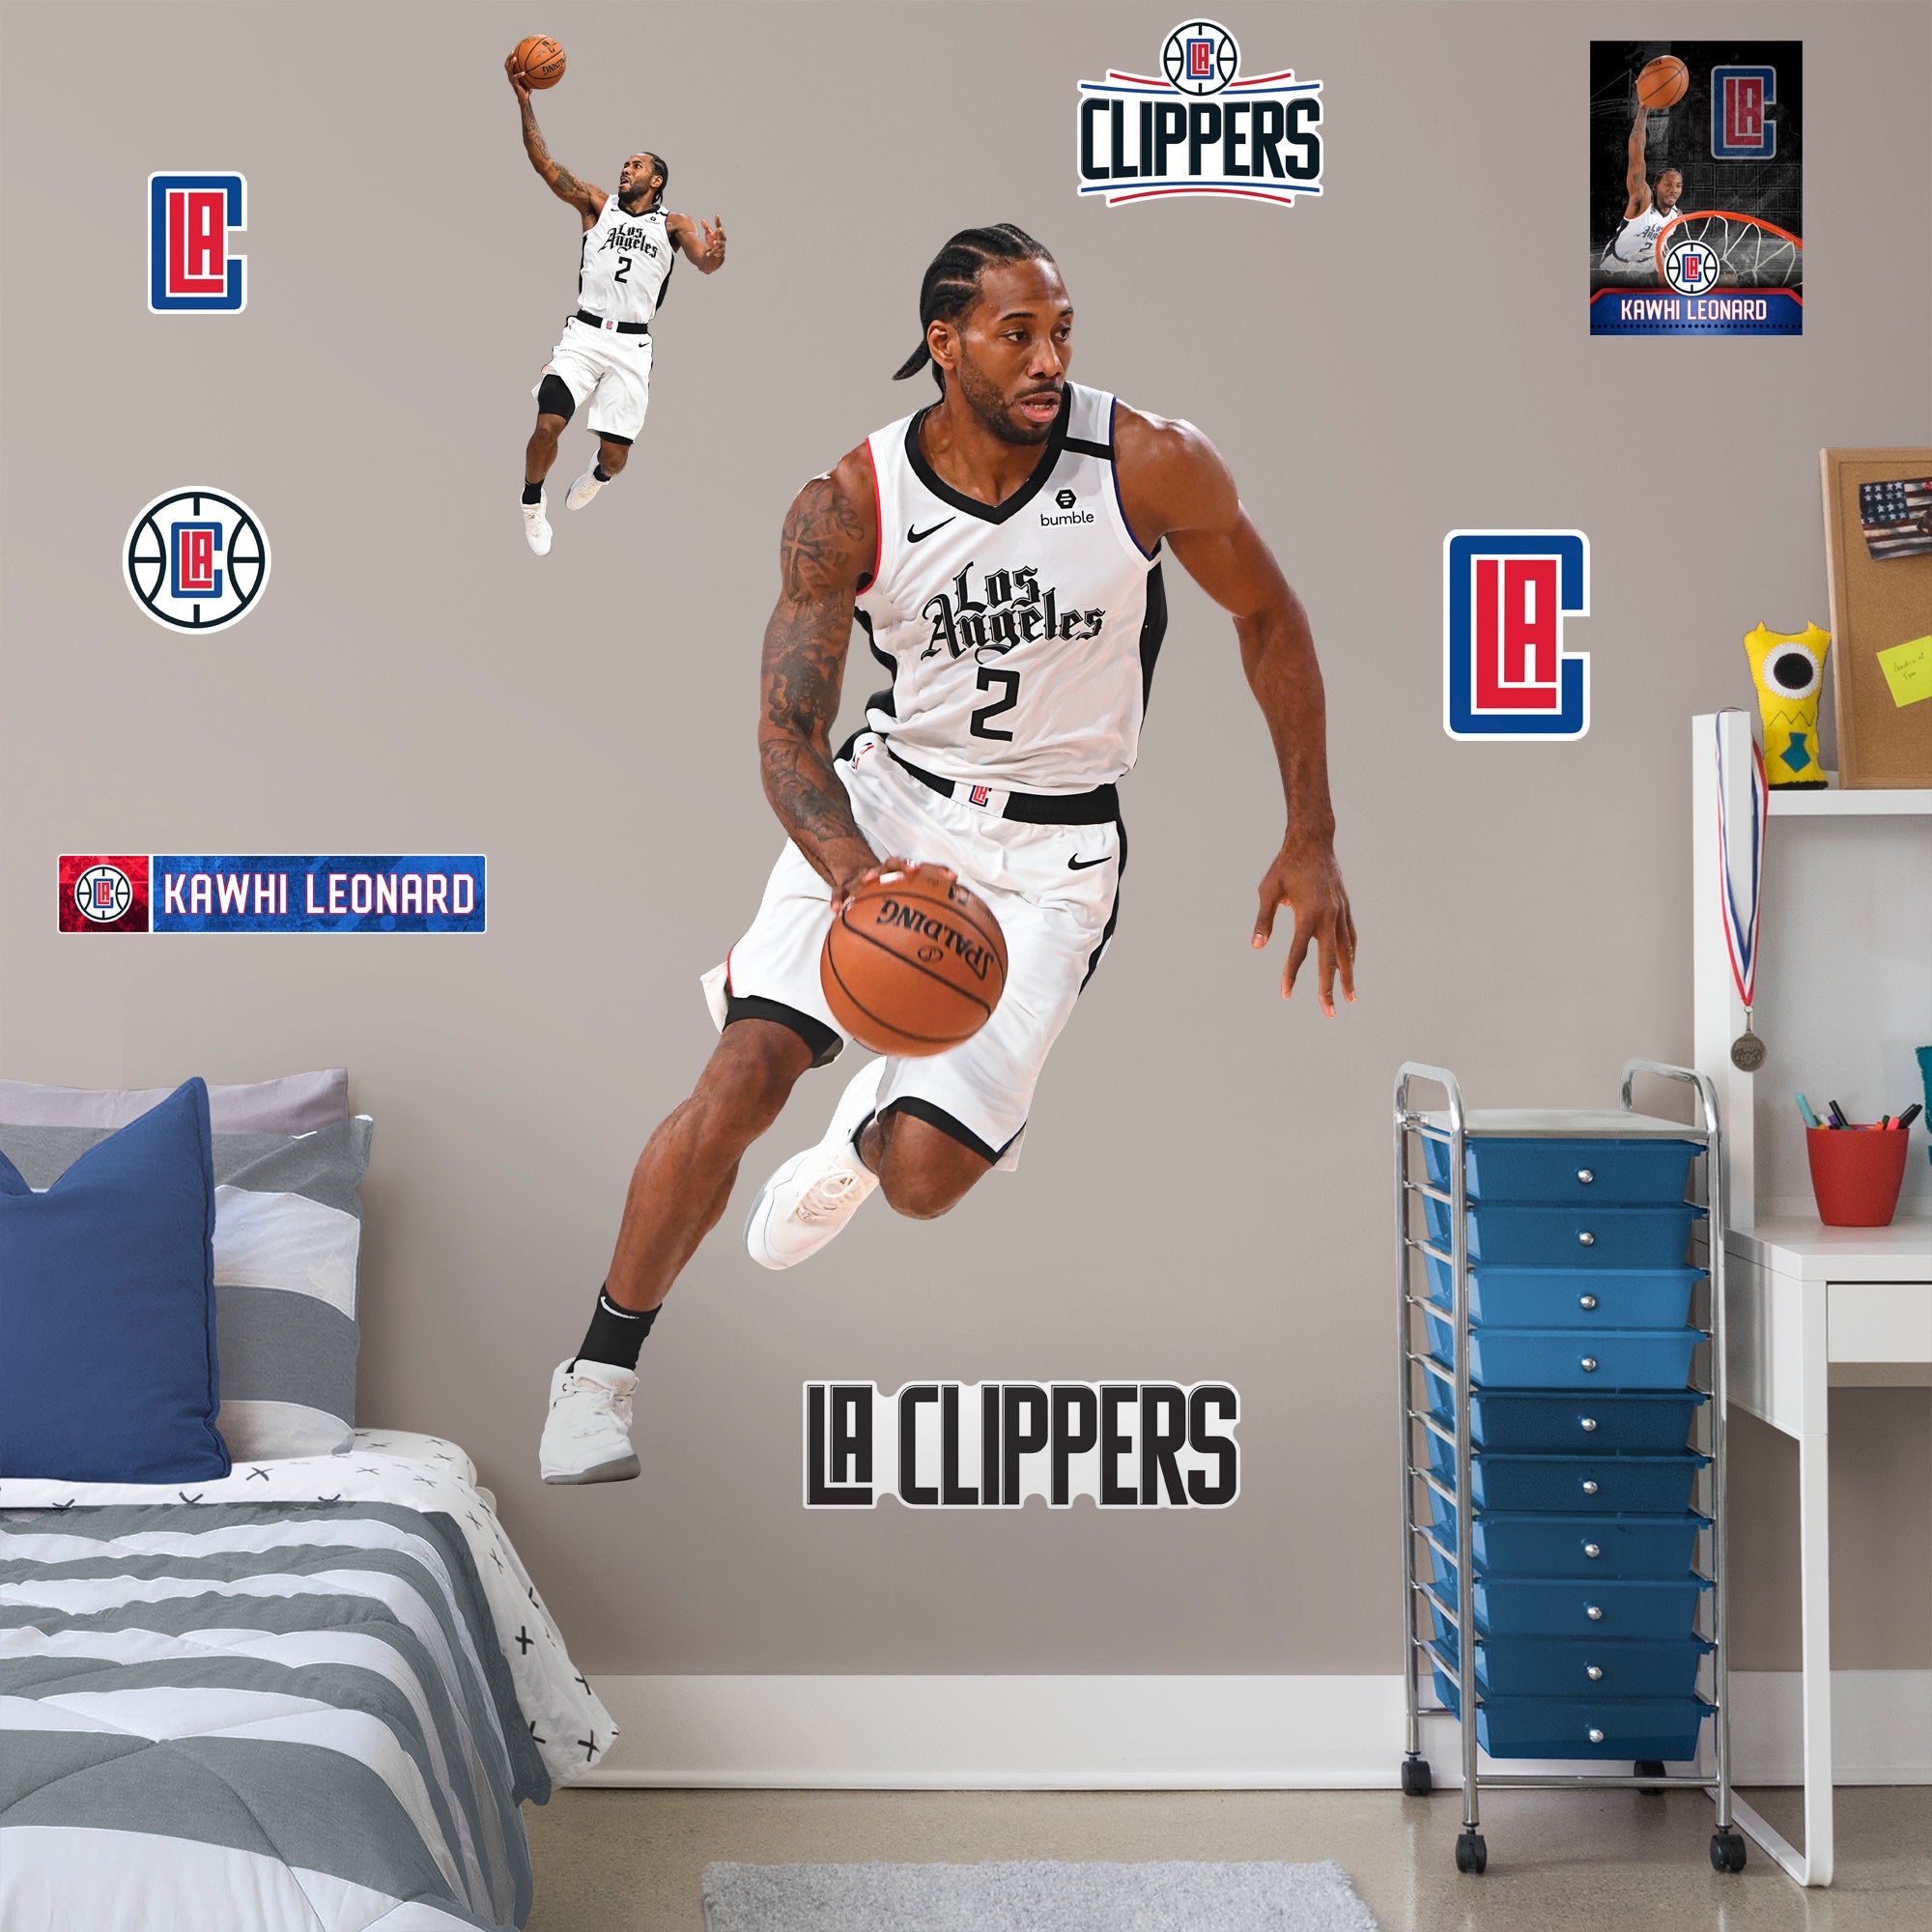 Kawhi Leonard 2020 Old English Jersey RealBig - Officially Licensed NBA Removable Wall Decal Life-Size Athlete + 9 Decals (50"W